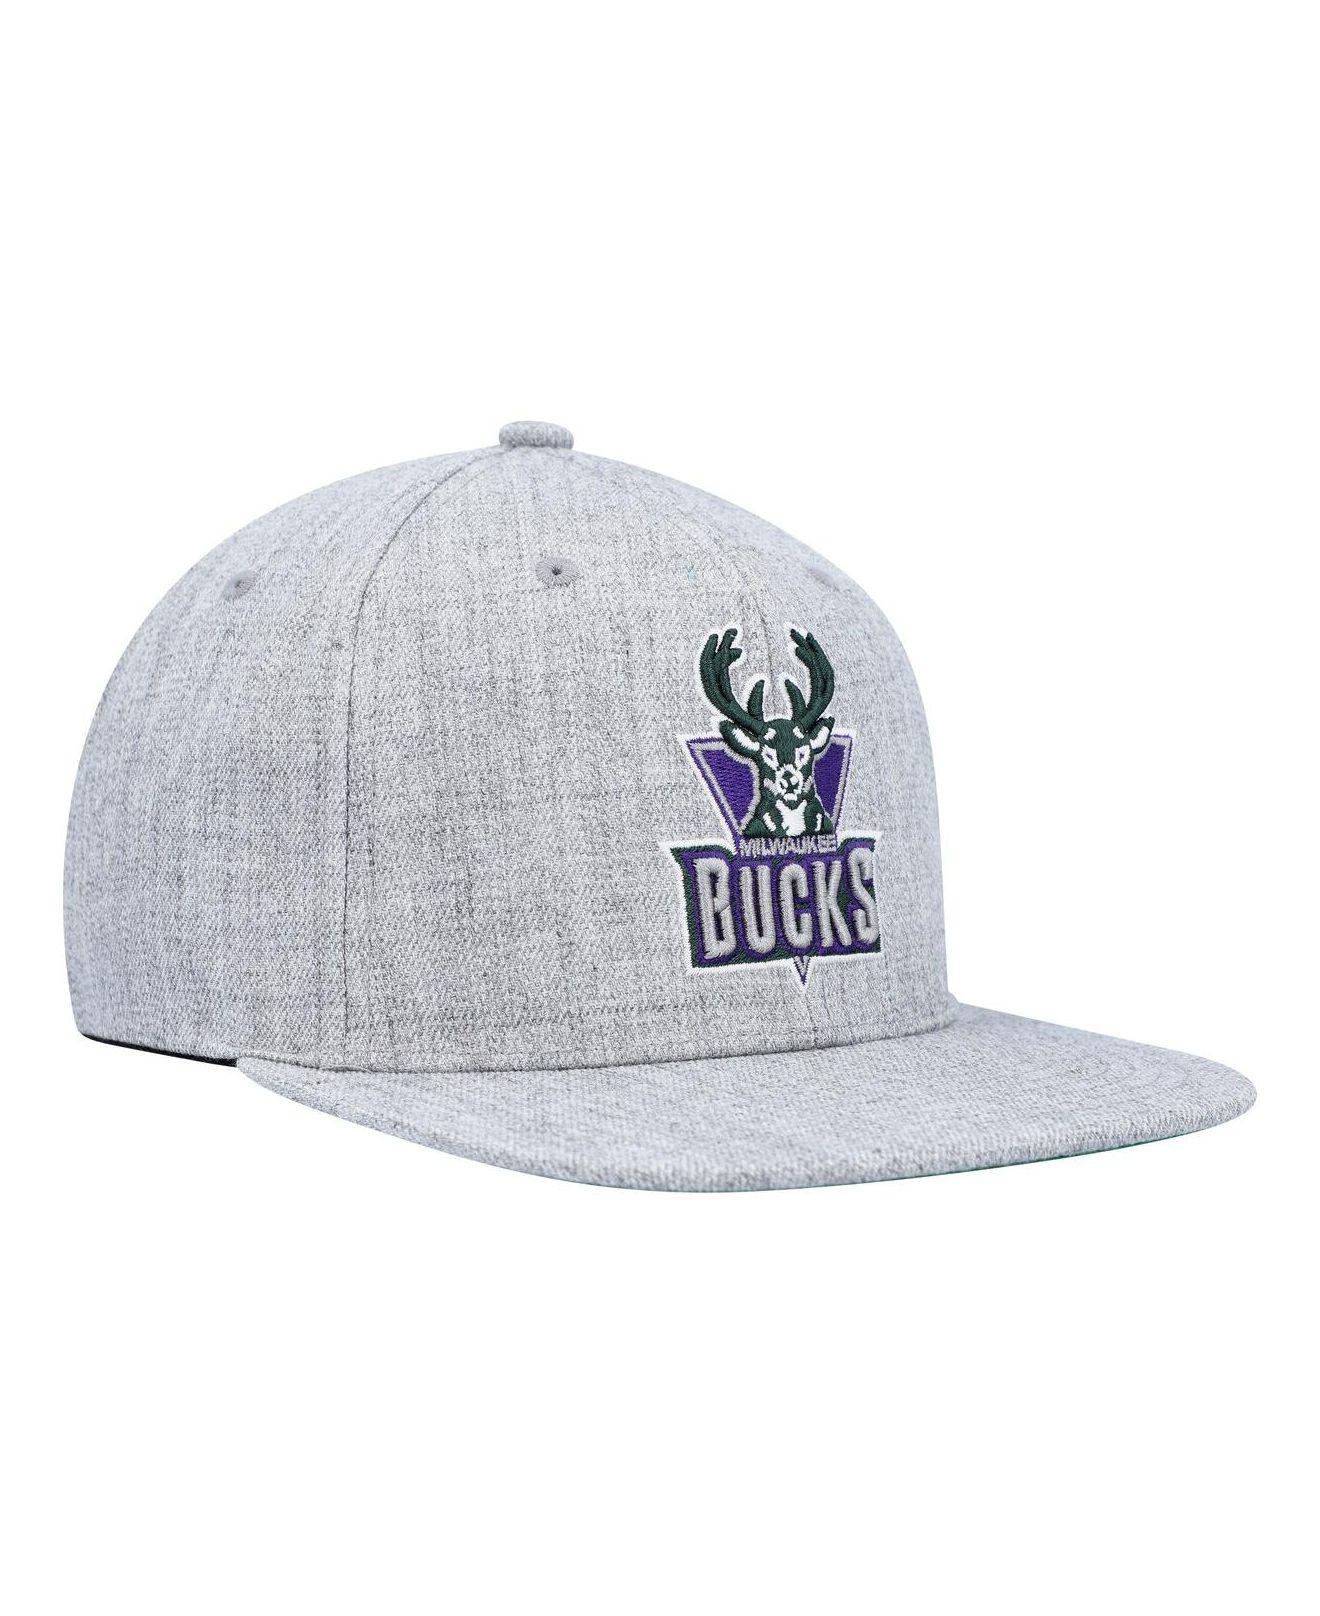 Mitchell & Ness Sacramento Kings Wool 2 Tone Fitted Cap - Macy's